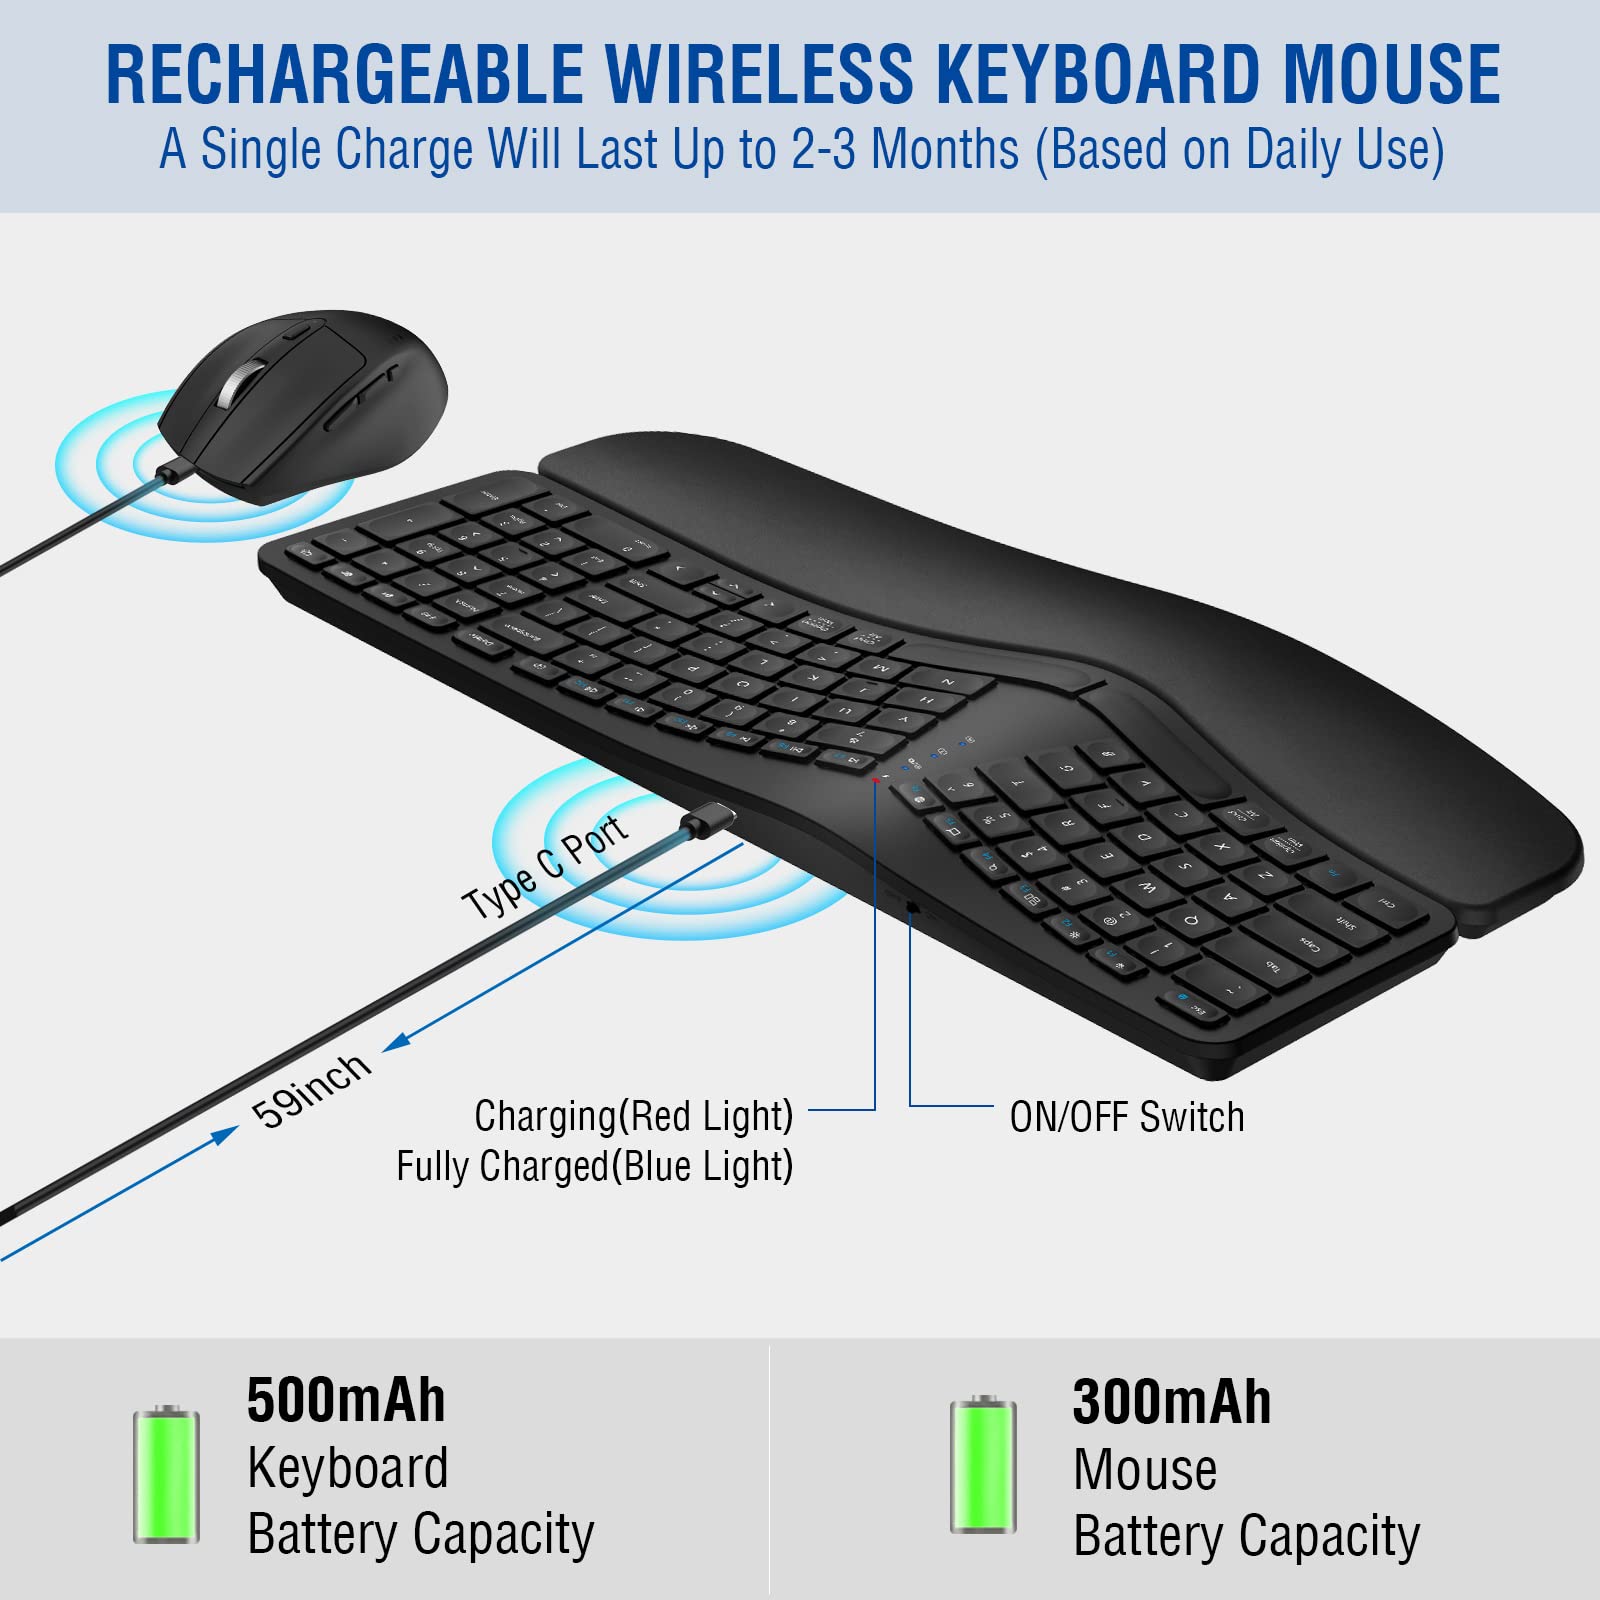 MK960 Ergonomic Wireless Keyboard Mouse Combo, Bluetooth/2.4G Split Design Keyboard with Palm Rest and 4 Level DPI Adjustable Wireless Mouse Multi-Device, Rechargeable, for Windows/Mac/Android(Black)